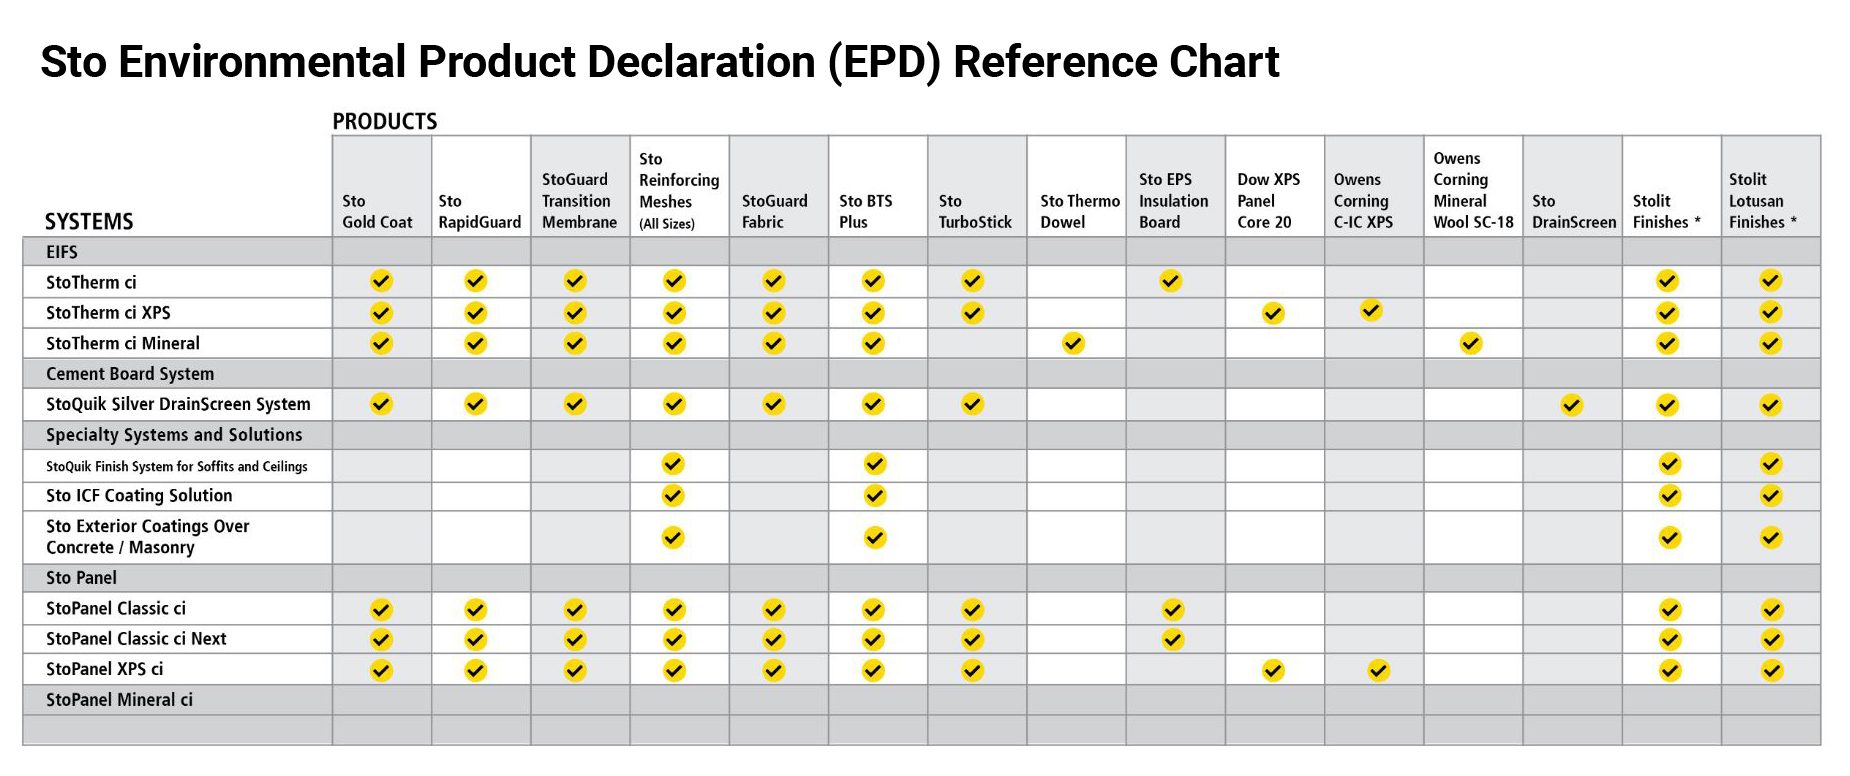 Sto Environmental Product Declaration (EPD) Reference Chart